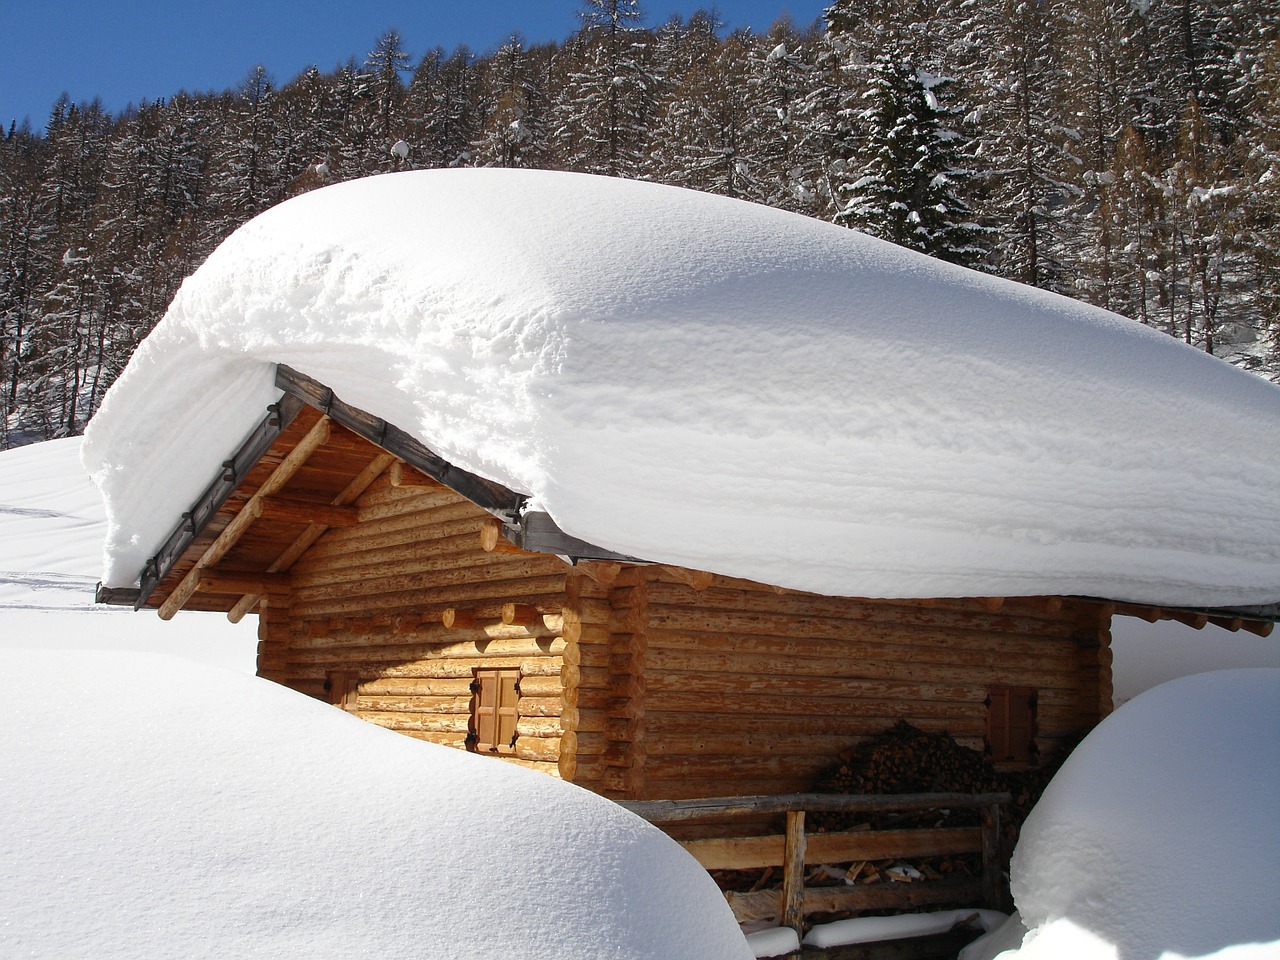 The snow on this roof is several feet deep, but how much snow is too much for a roof and threatens roof collapse? 